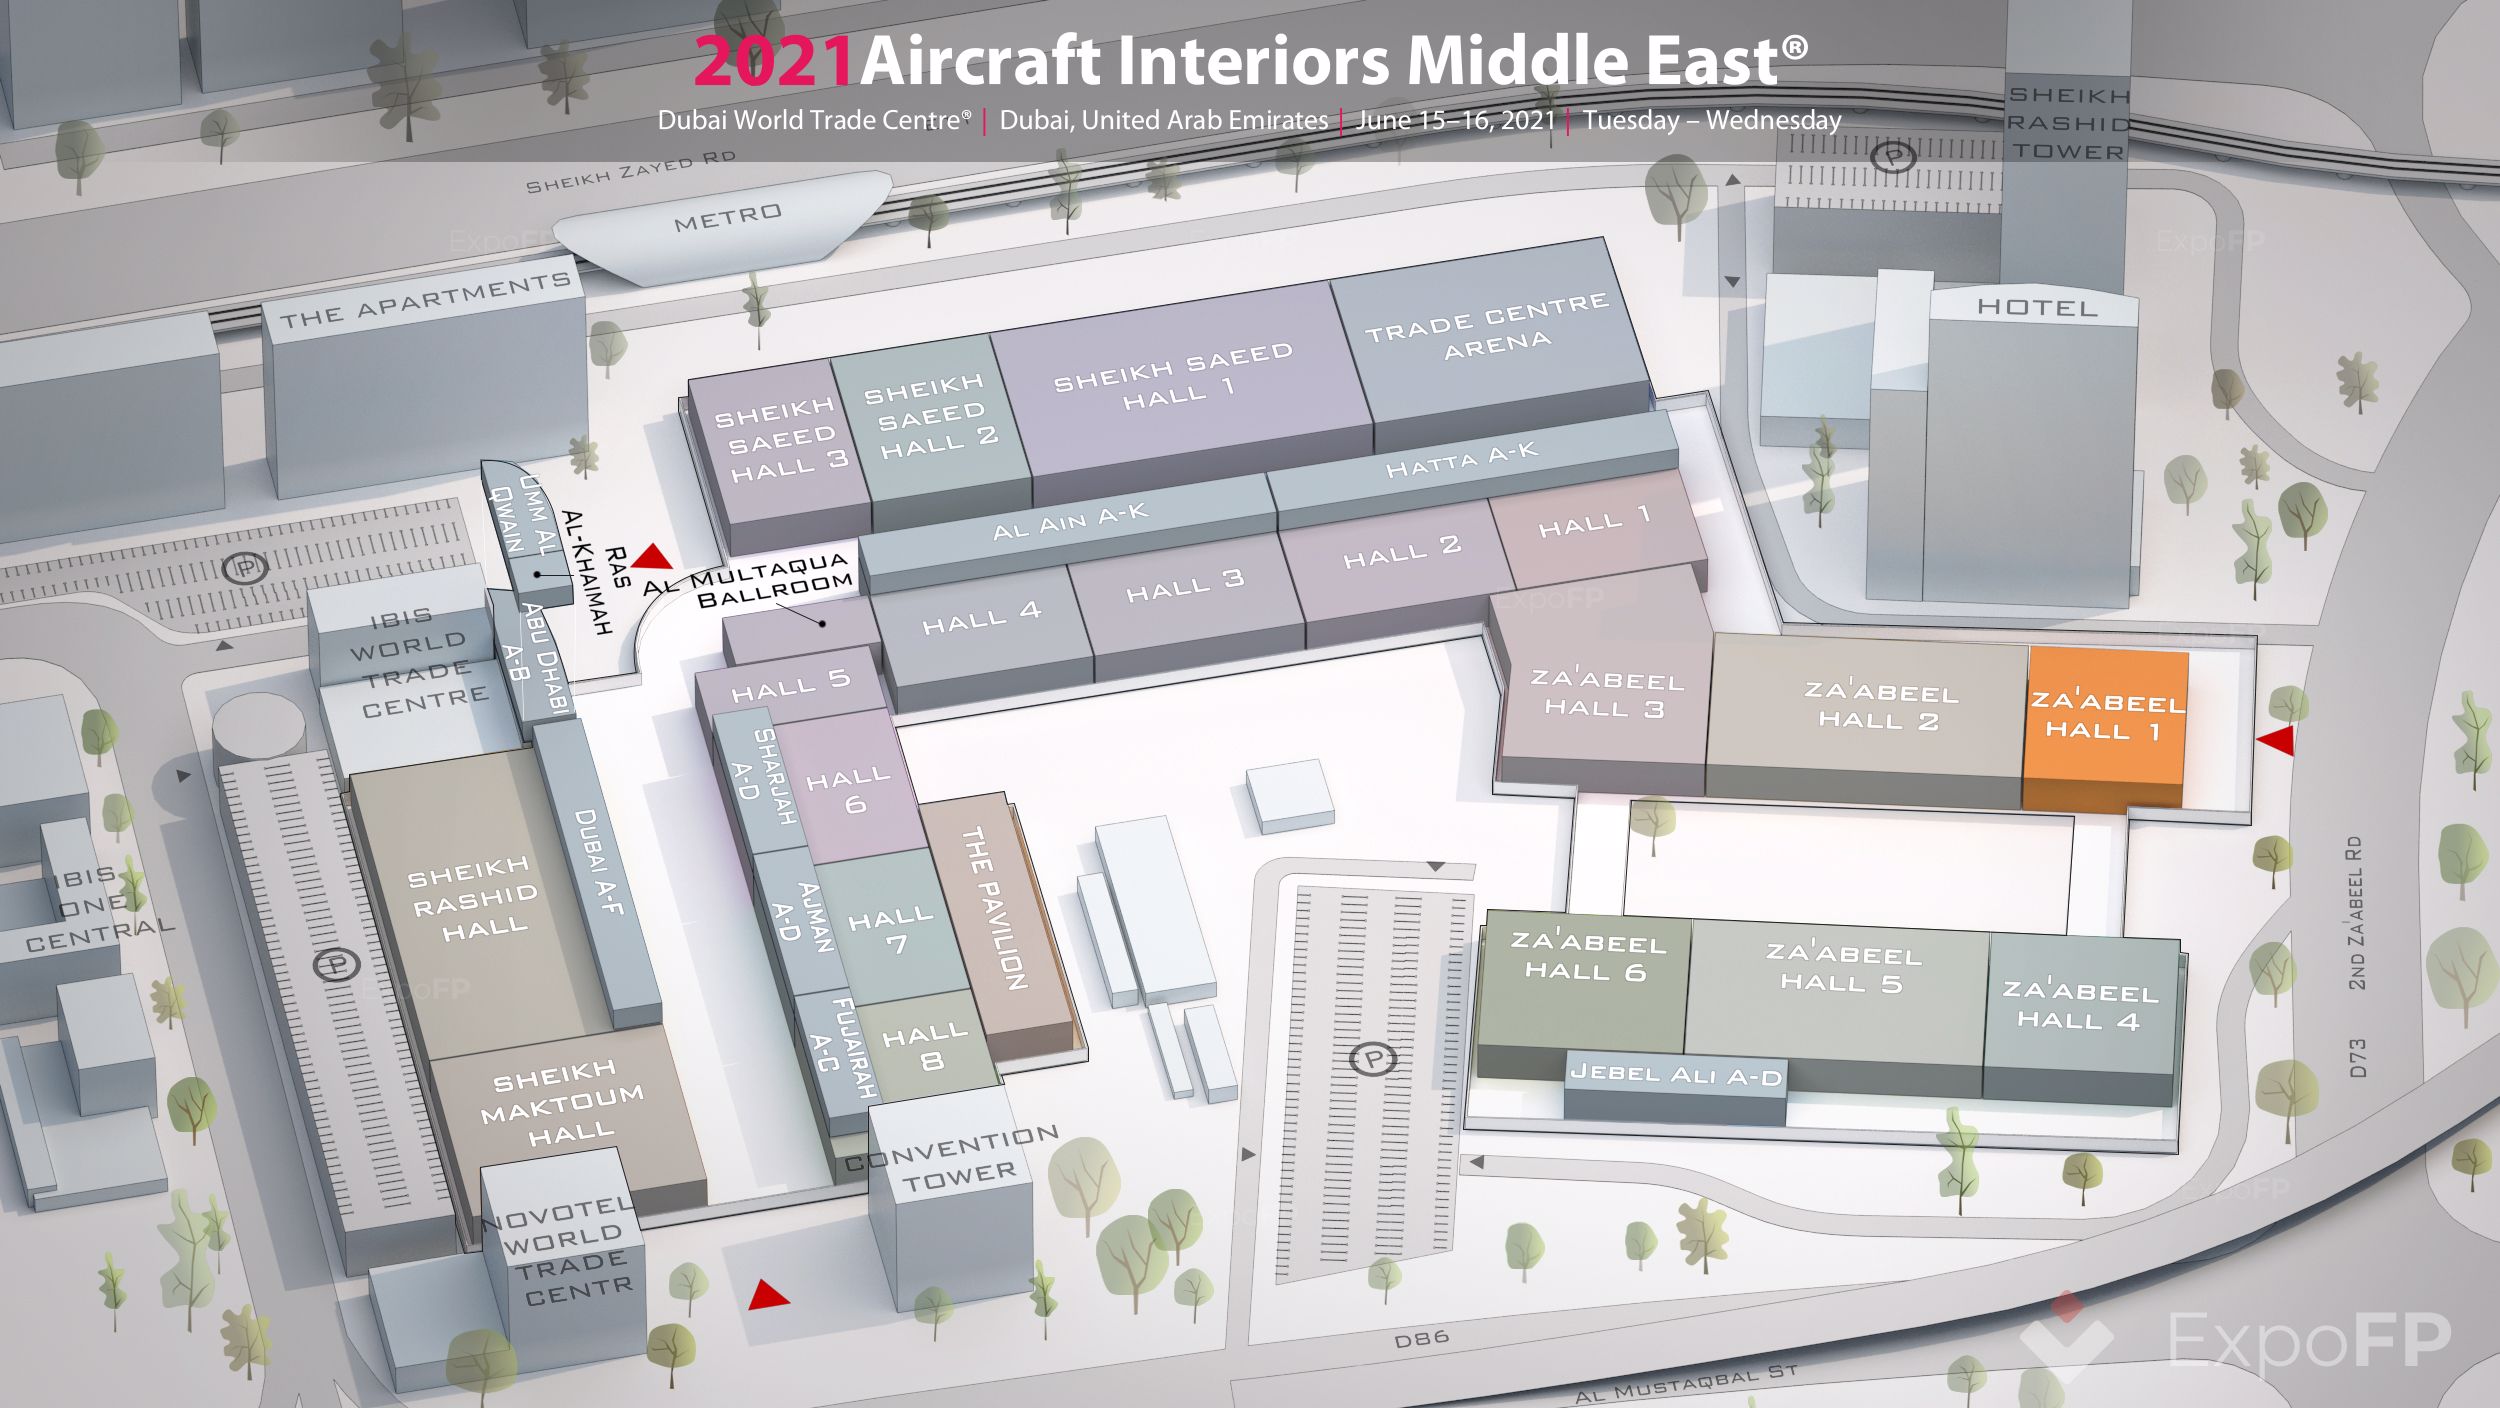 Aircraft Interiors Middle East 2021 in Dubai World Trade Centre